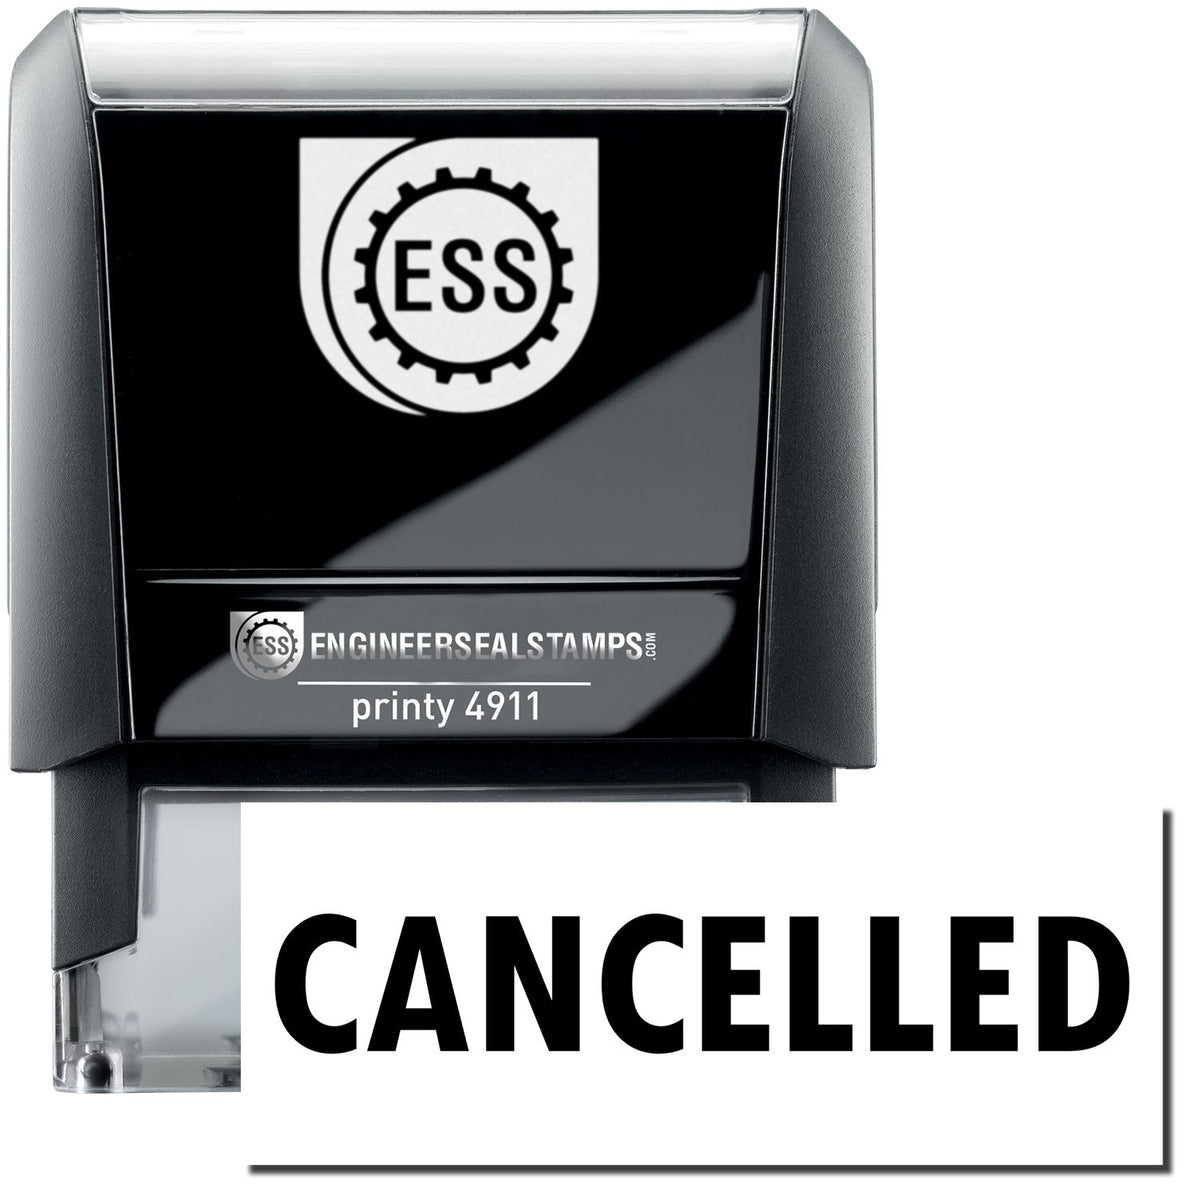 A self-inking stamp with a stamped image showing how the text &quot;CANCELLED&quot; is displayed after stamping.